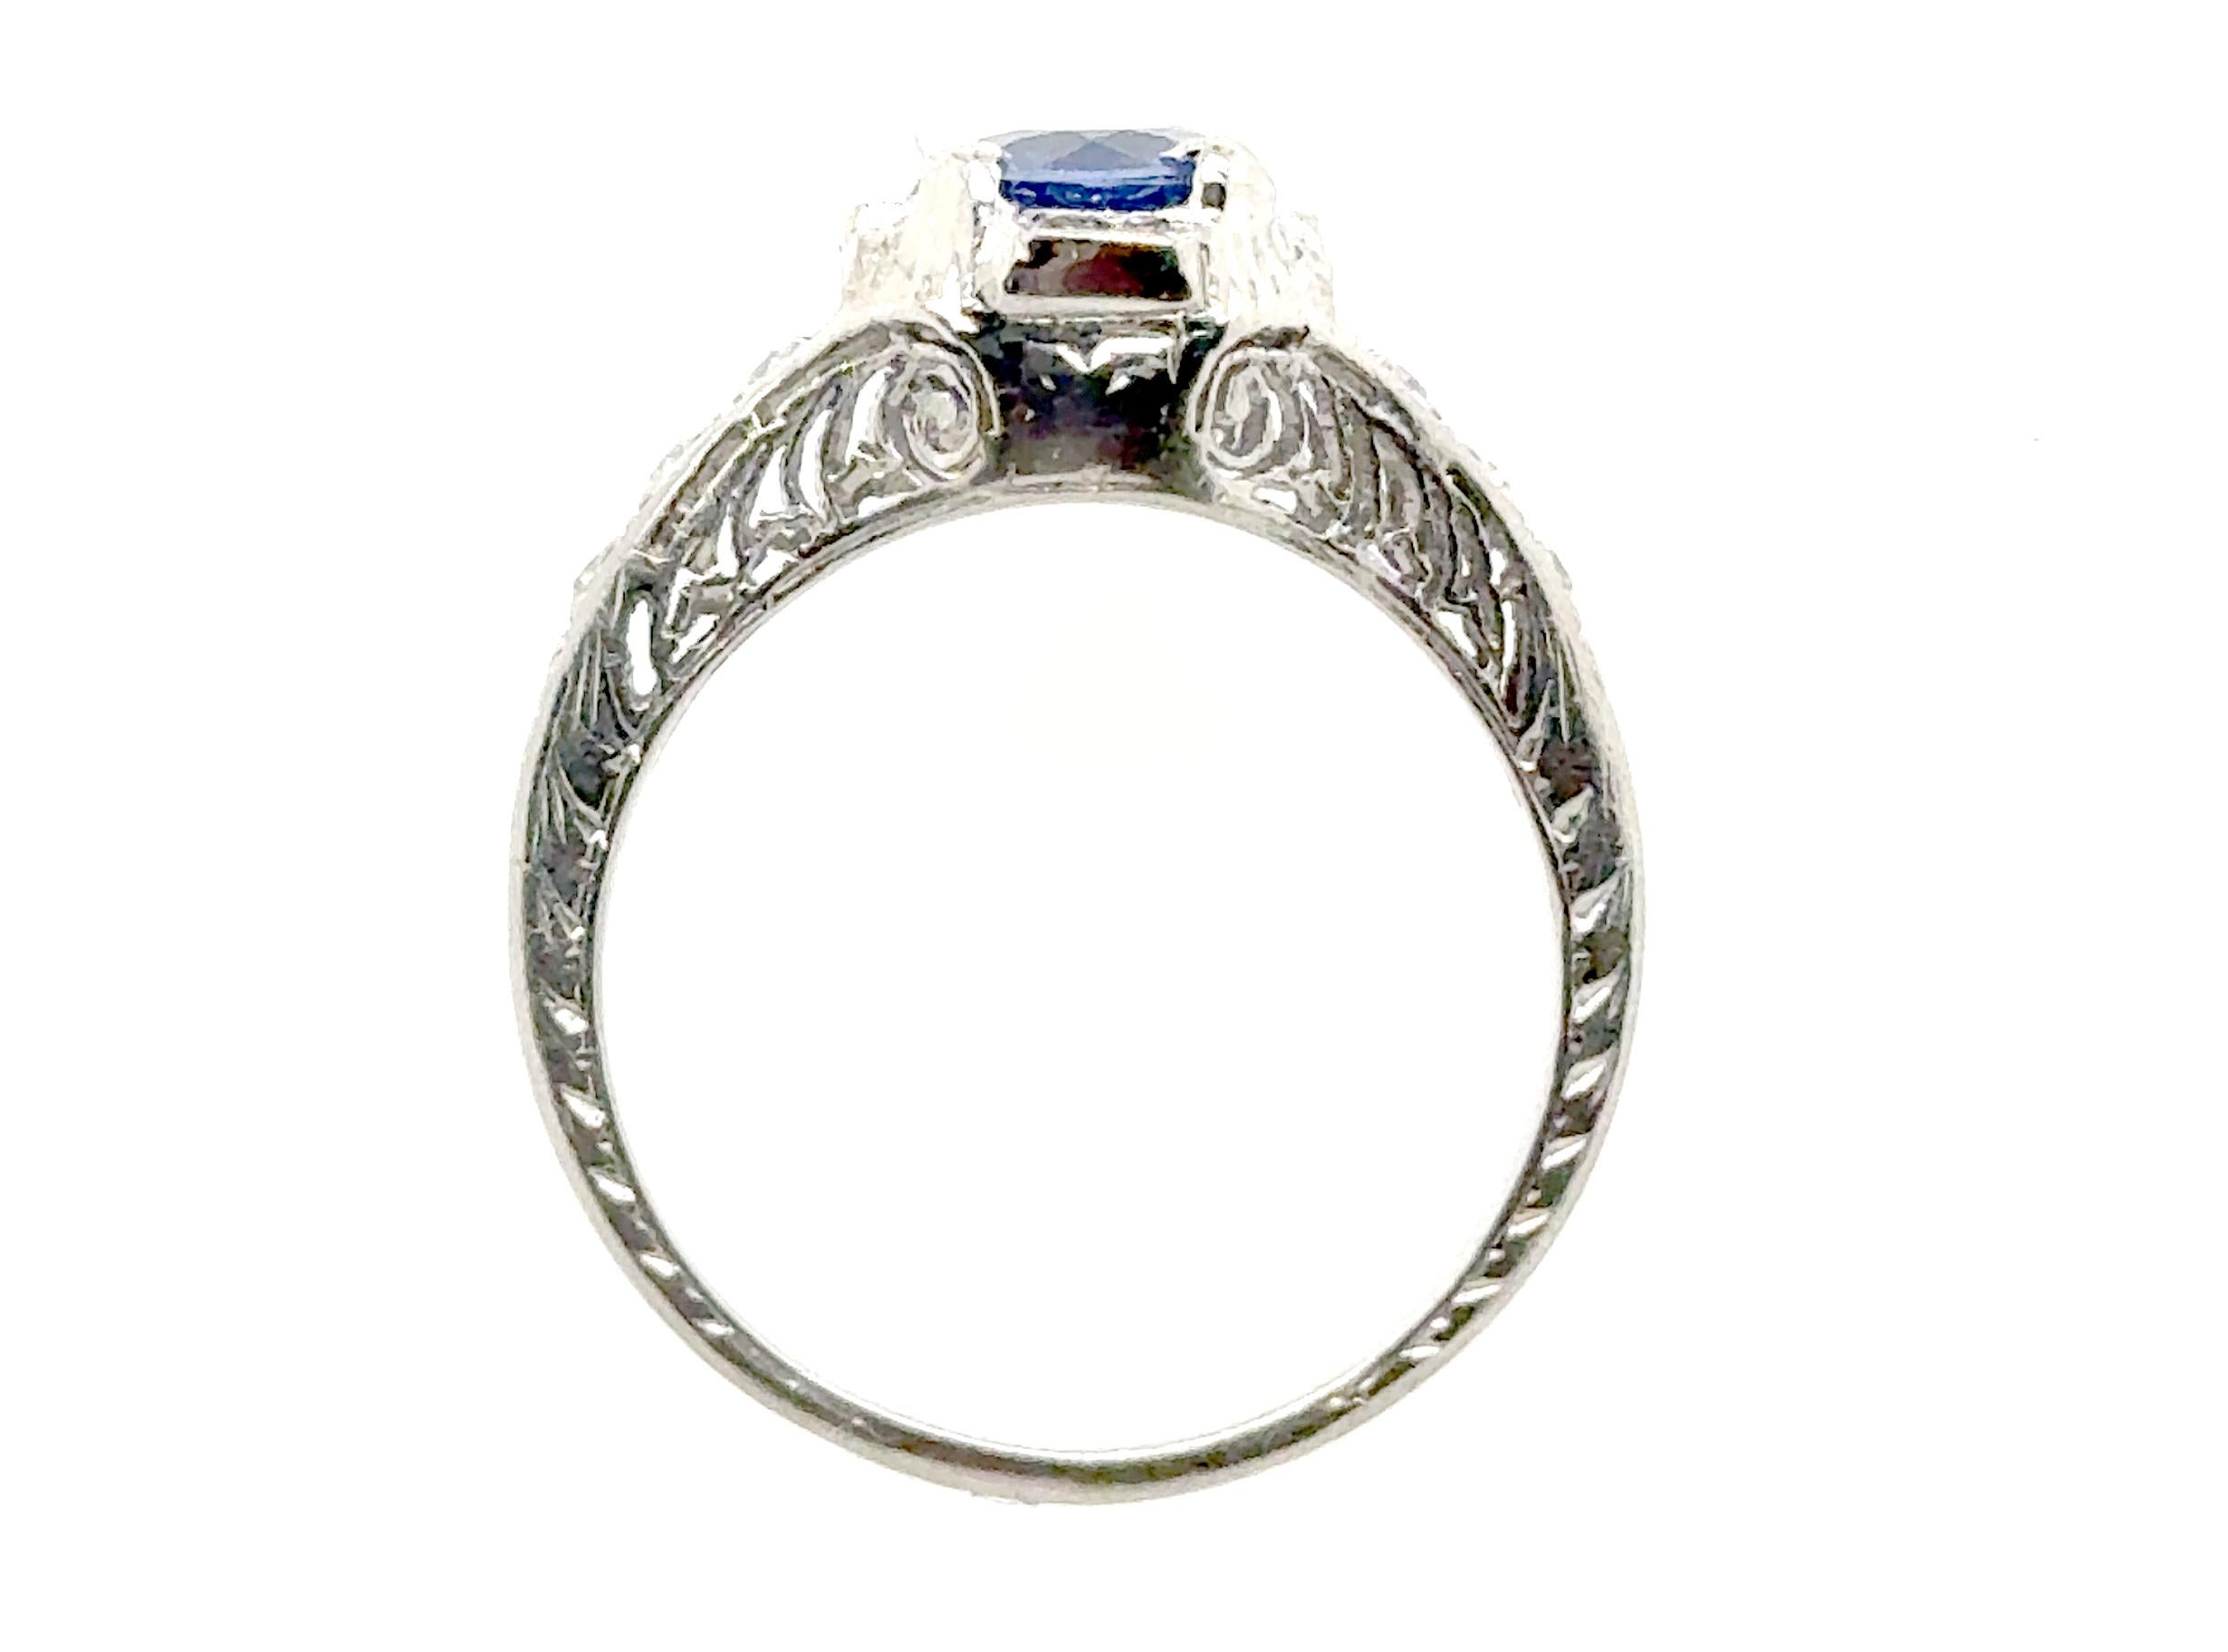 Genuine Original Art Deco Antique from 1920's-1930's Kashmir Sapphire and Diamond Ring 1.30ct Vintage Platinum


Features a Genuine 1.07ct Natural Blue Round Sapphire at its Center

Timeless and Distinctive Piece of Jewelry from the Past. 

90%